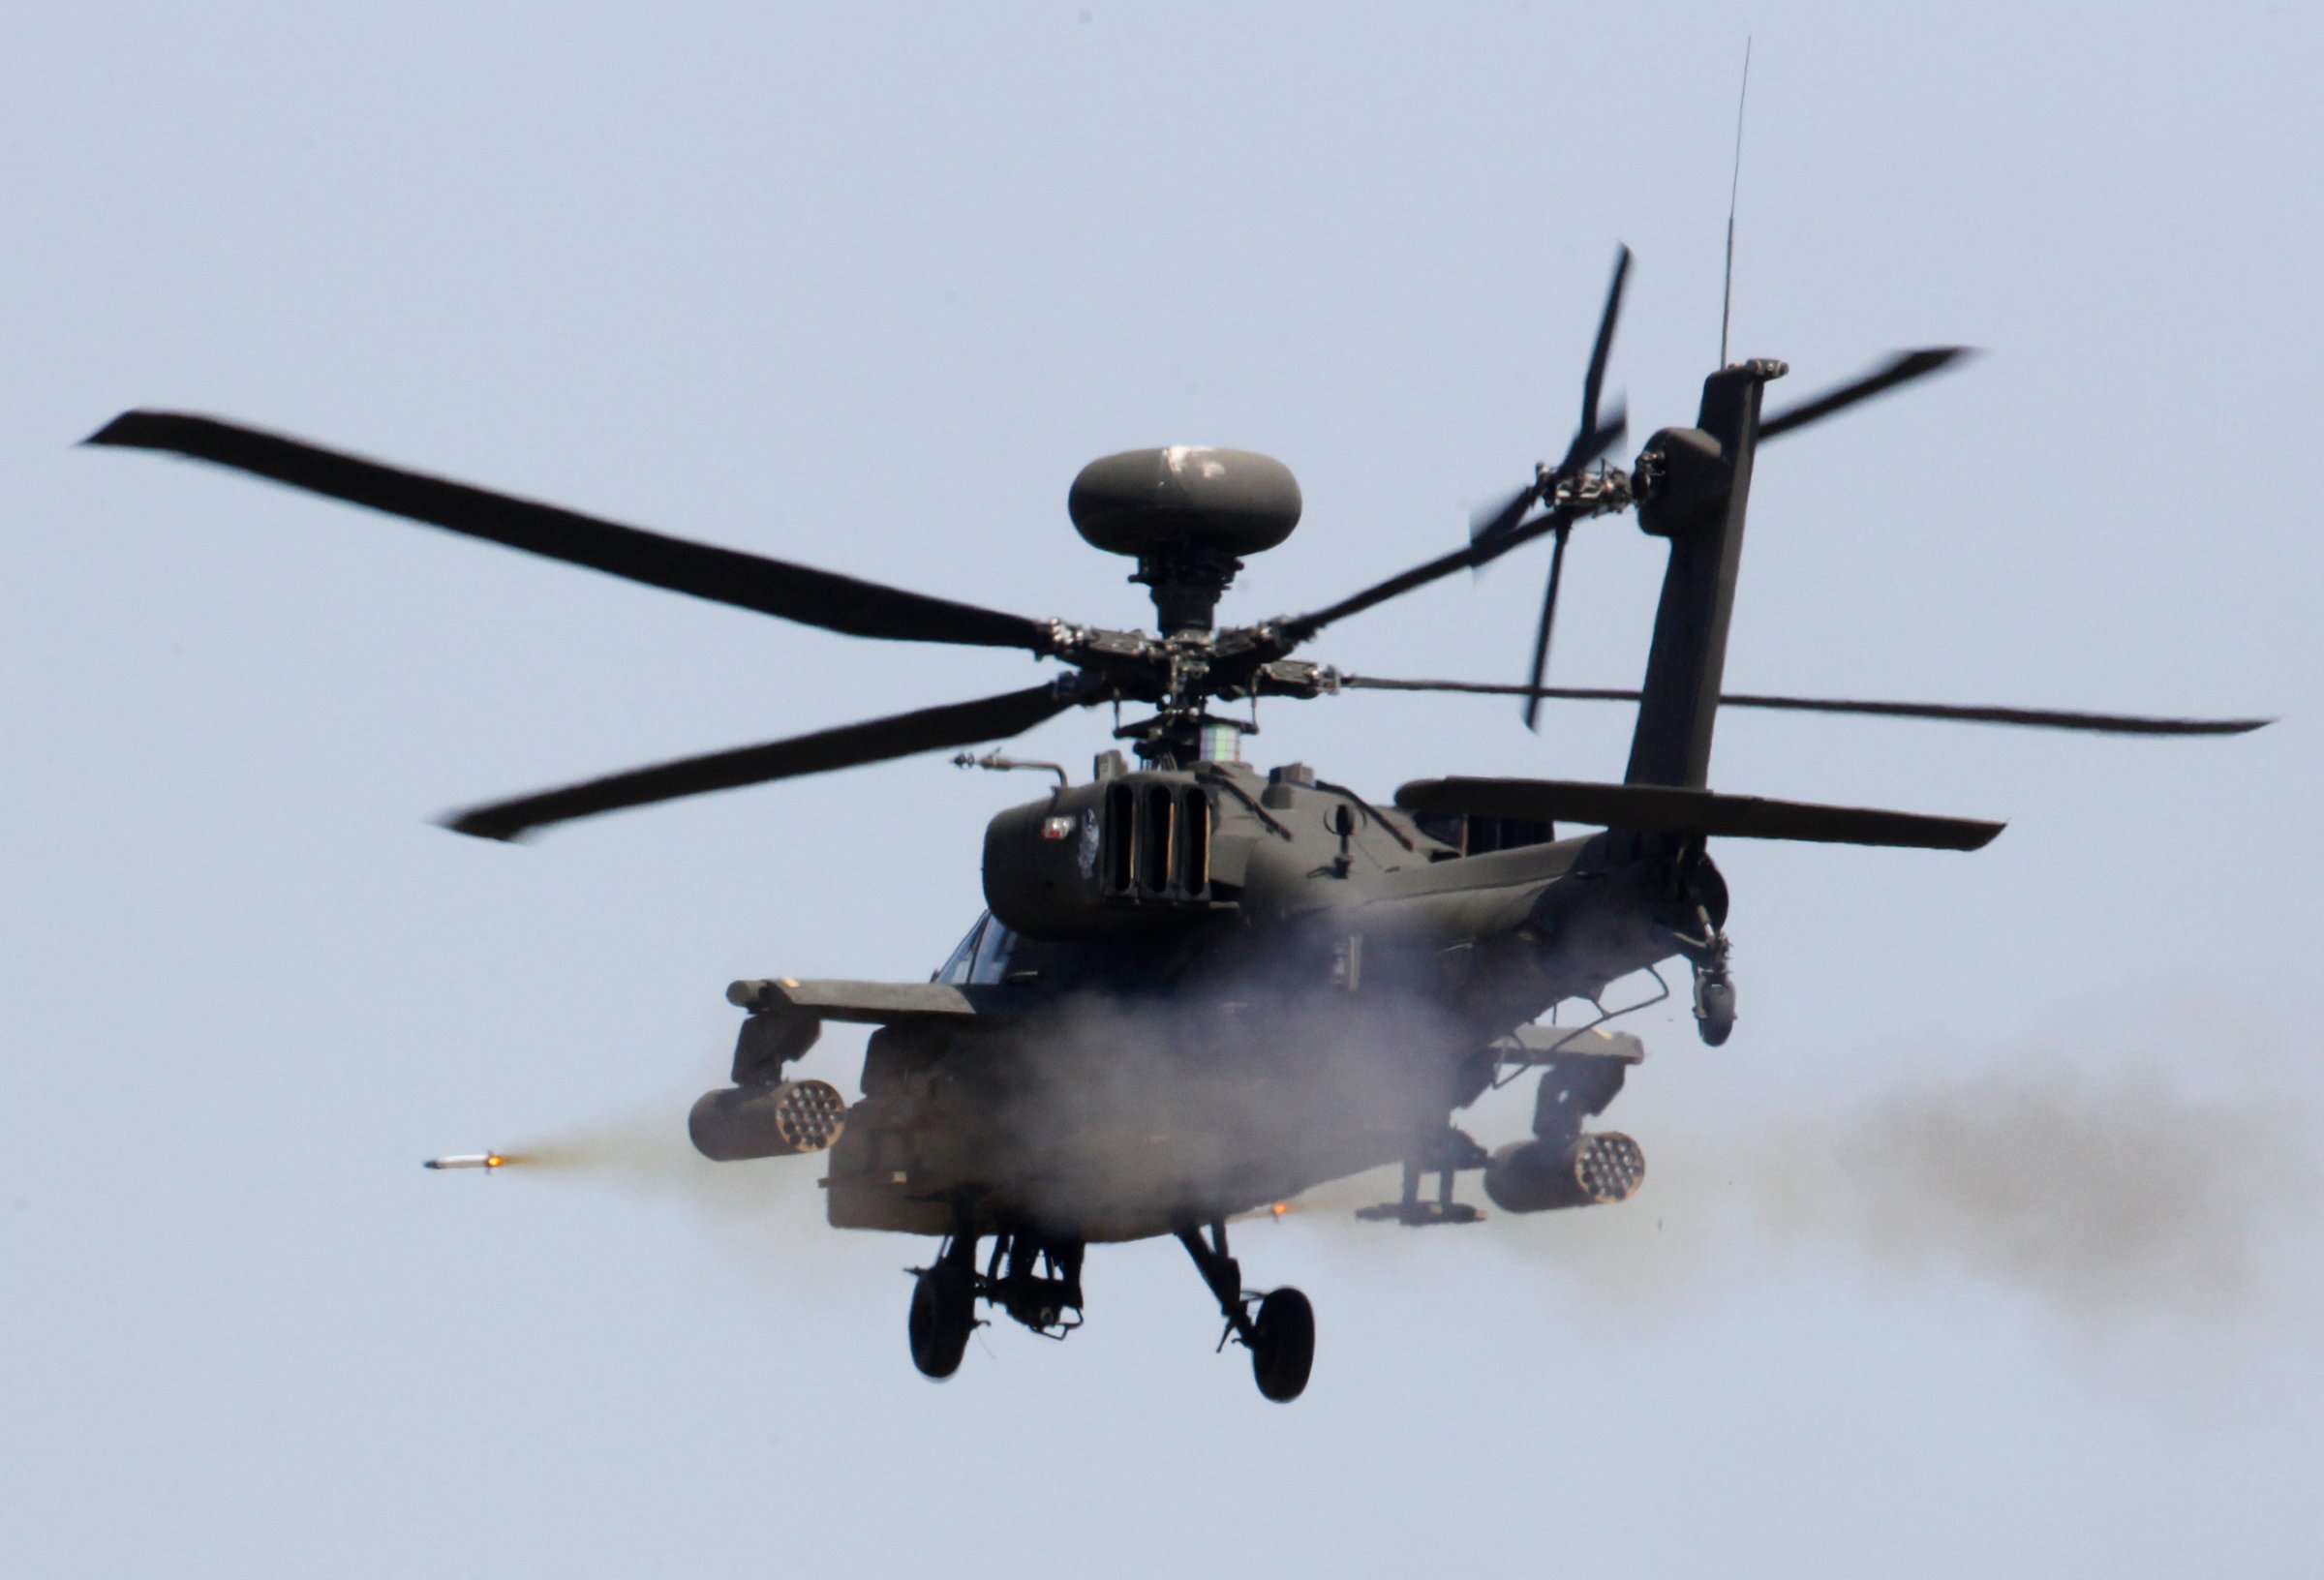 A U.S. AH-64 Apache helicopter fires a missile during a live fire gunnery exercise with the South Korean army at the U.S. army's Rodriguez range in Pocheon